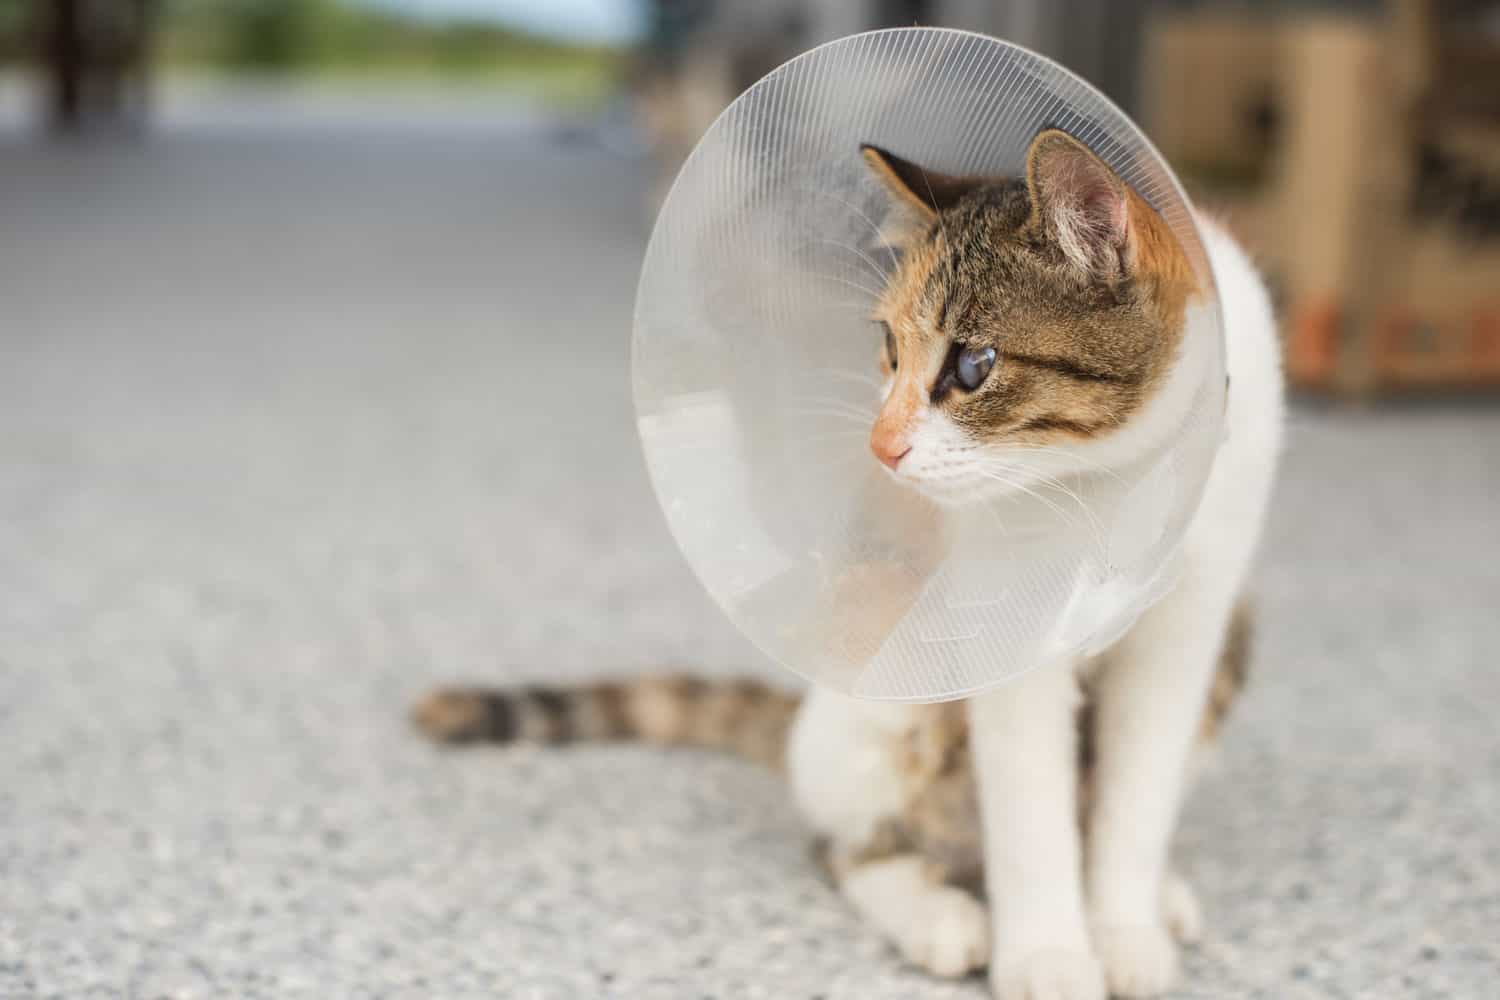 The cat wears a collar to prevent licking the wound after